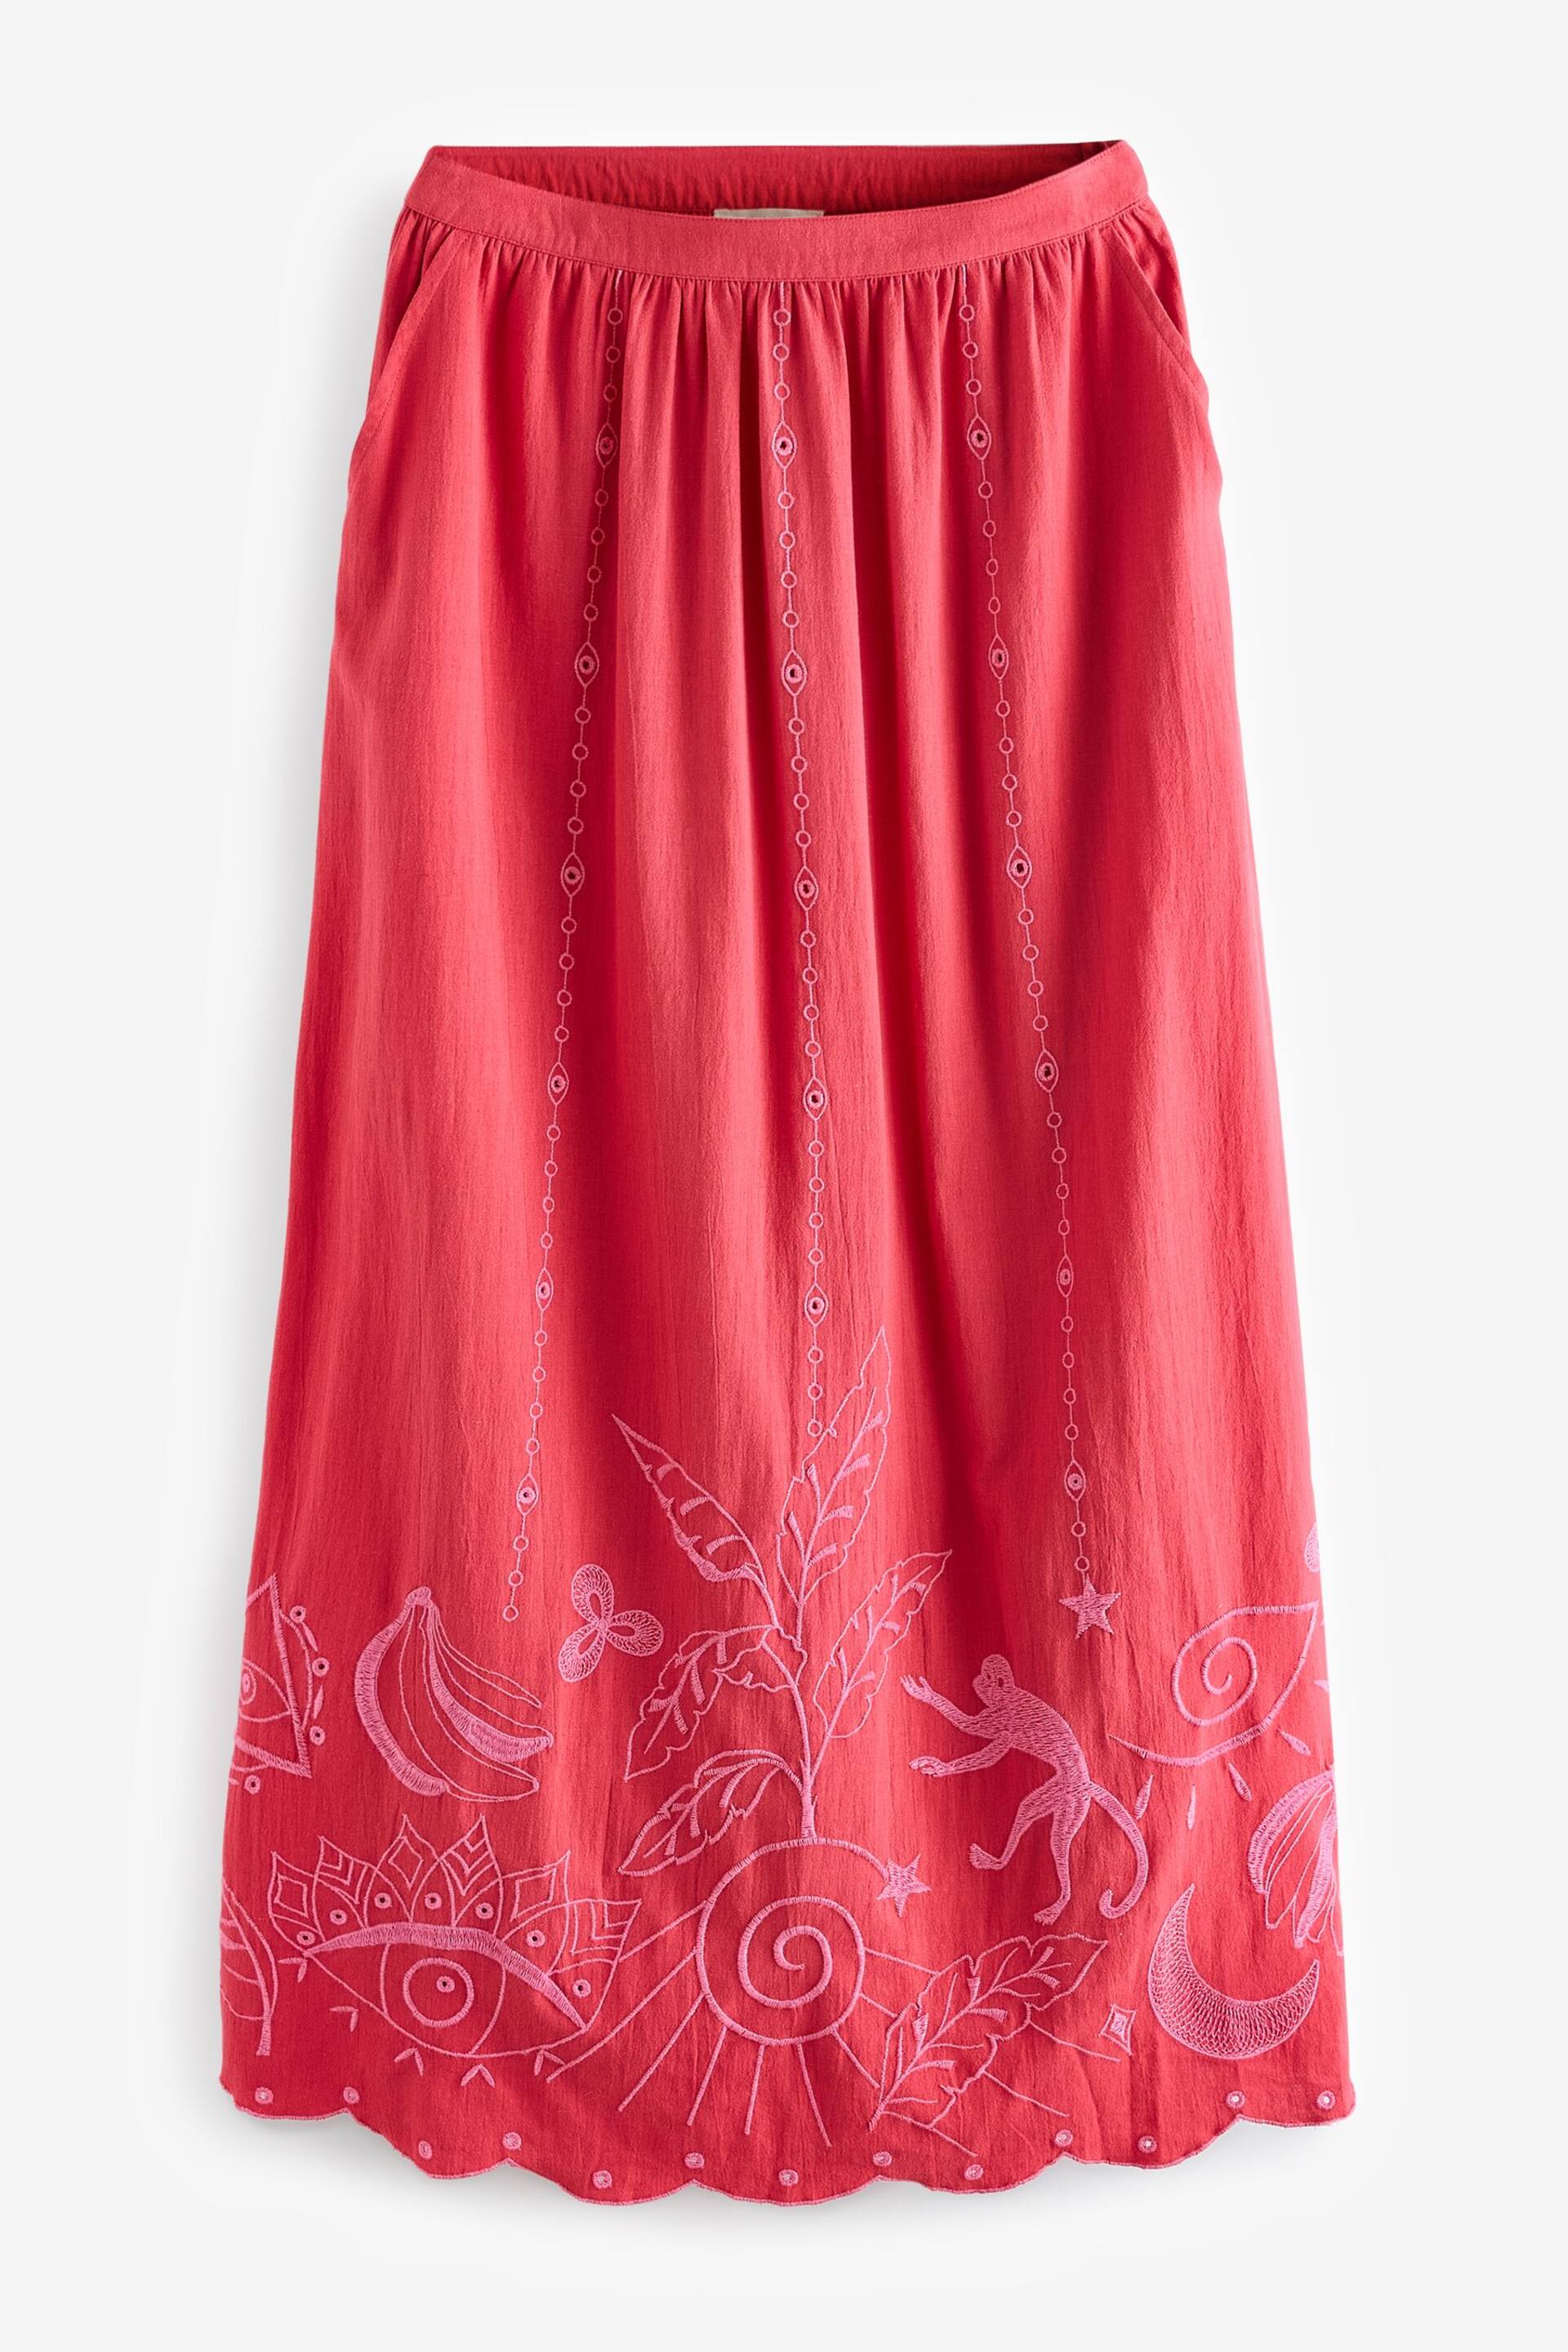 Red/Pink Embroidered Summer Midi Skirt - Image 5 of 6